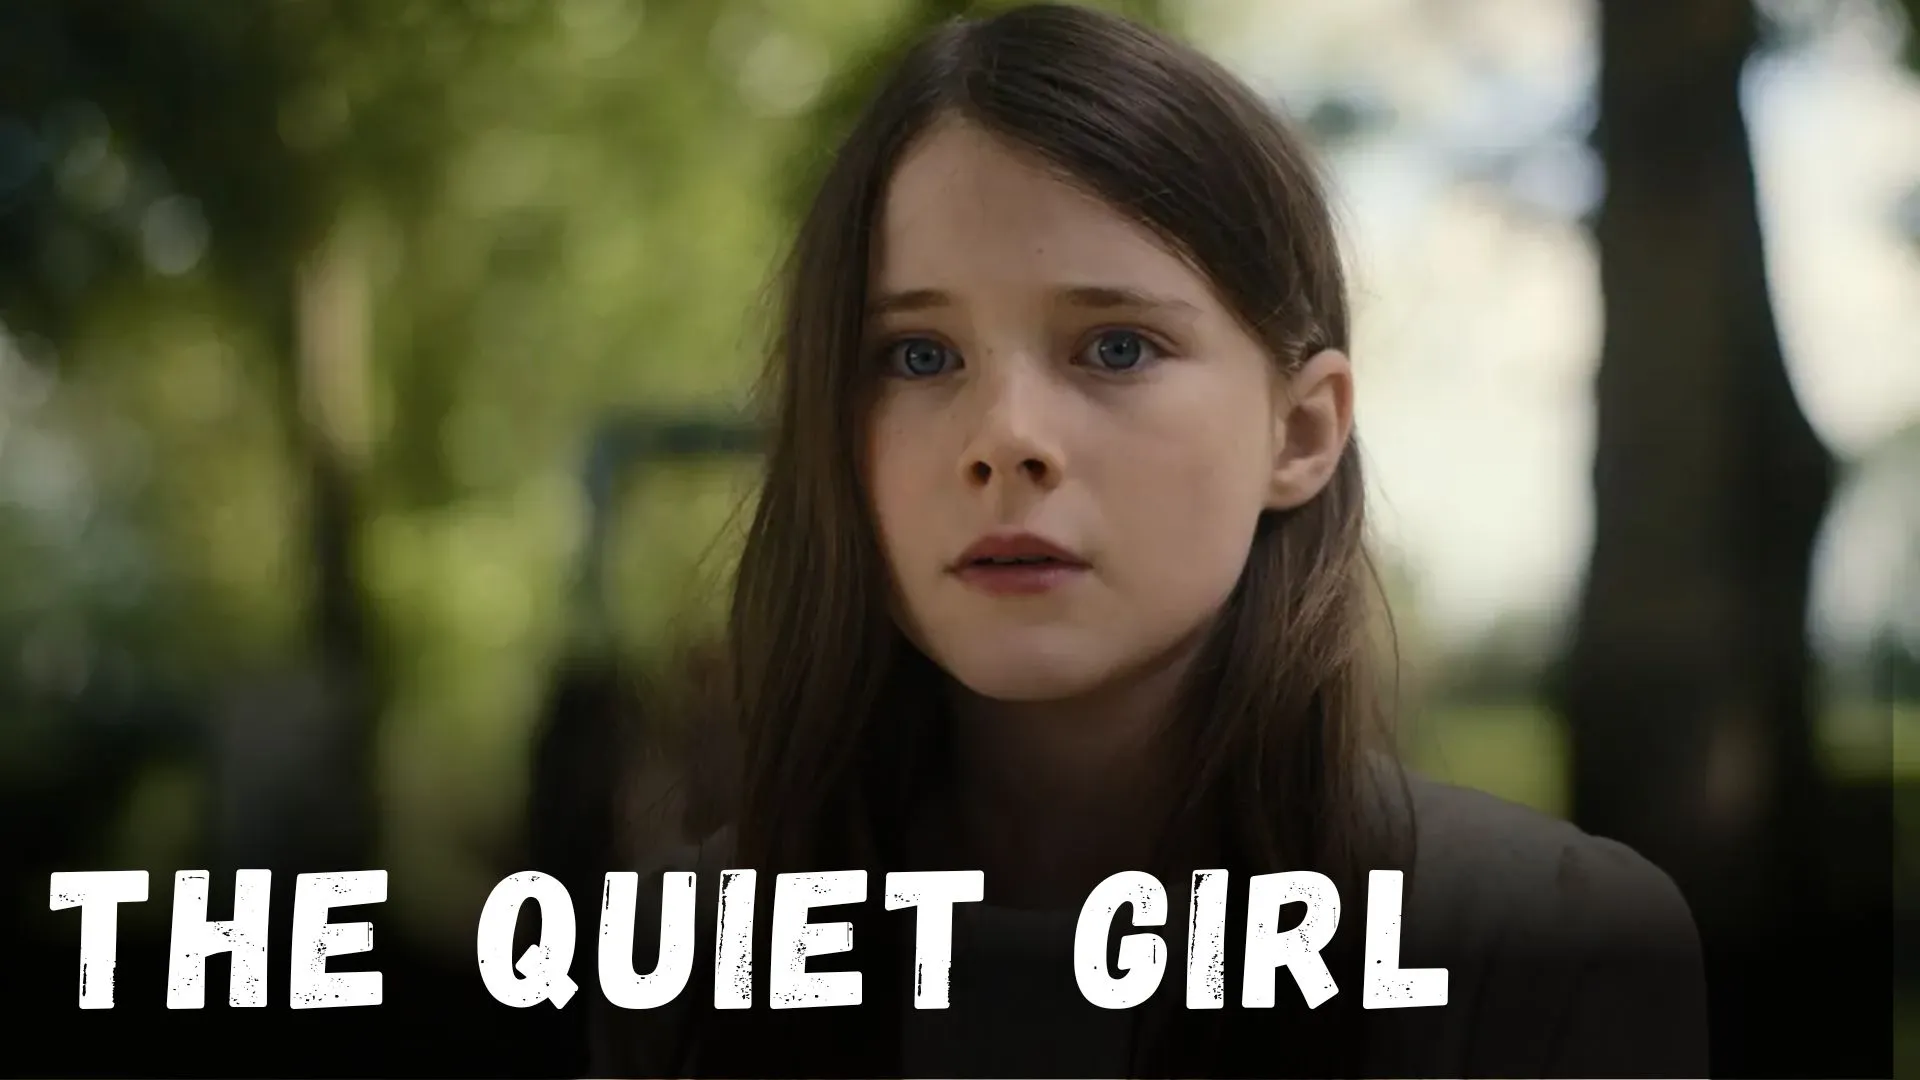 The Quiet Girl Parents Guide